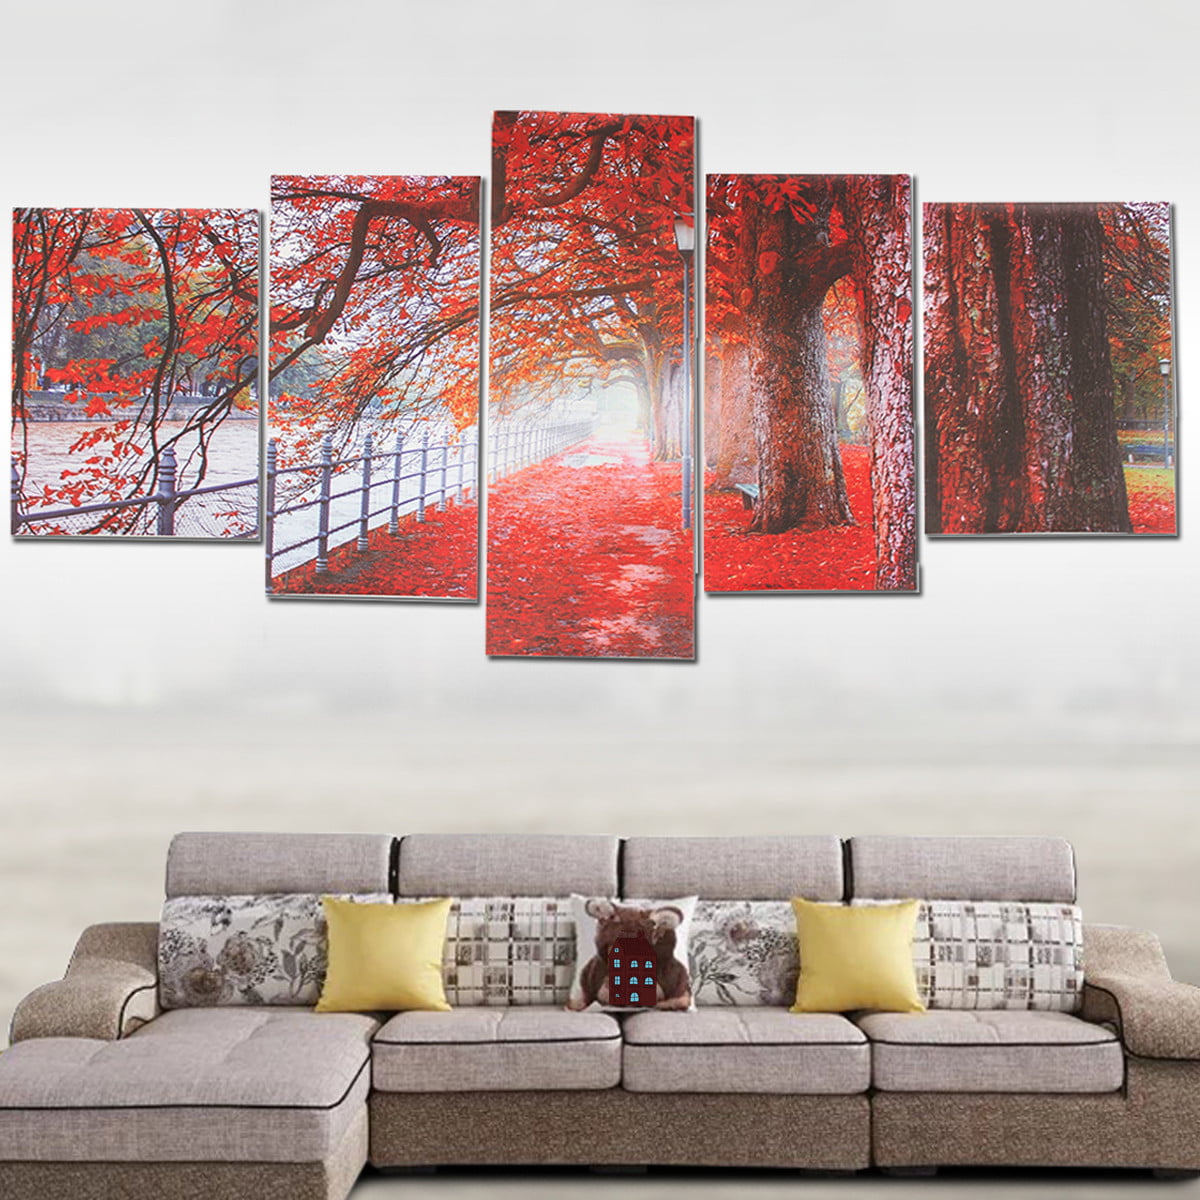 5PCS Unframed Modern Art Canvas Painting Scenery Print Pictures Home Wall Decor 